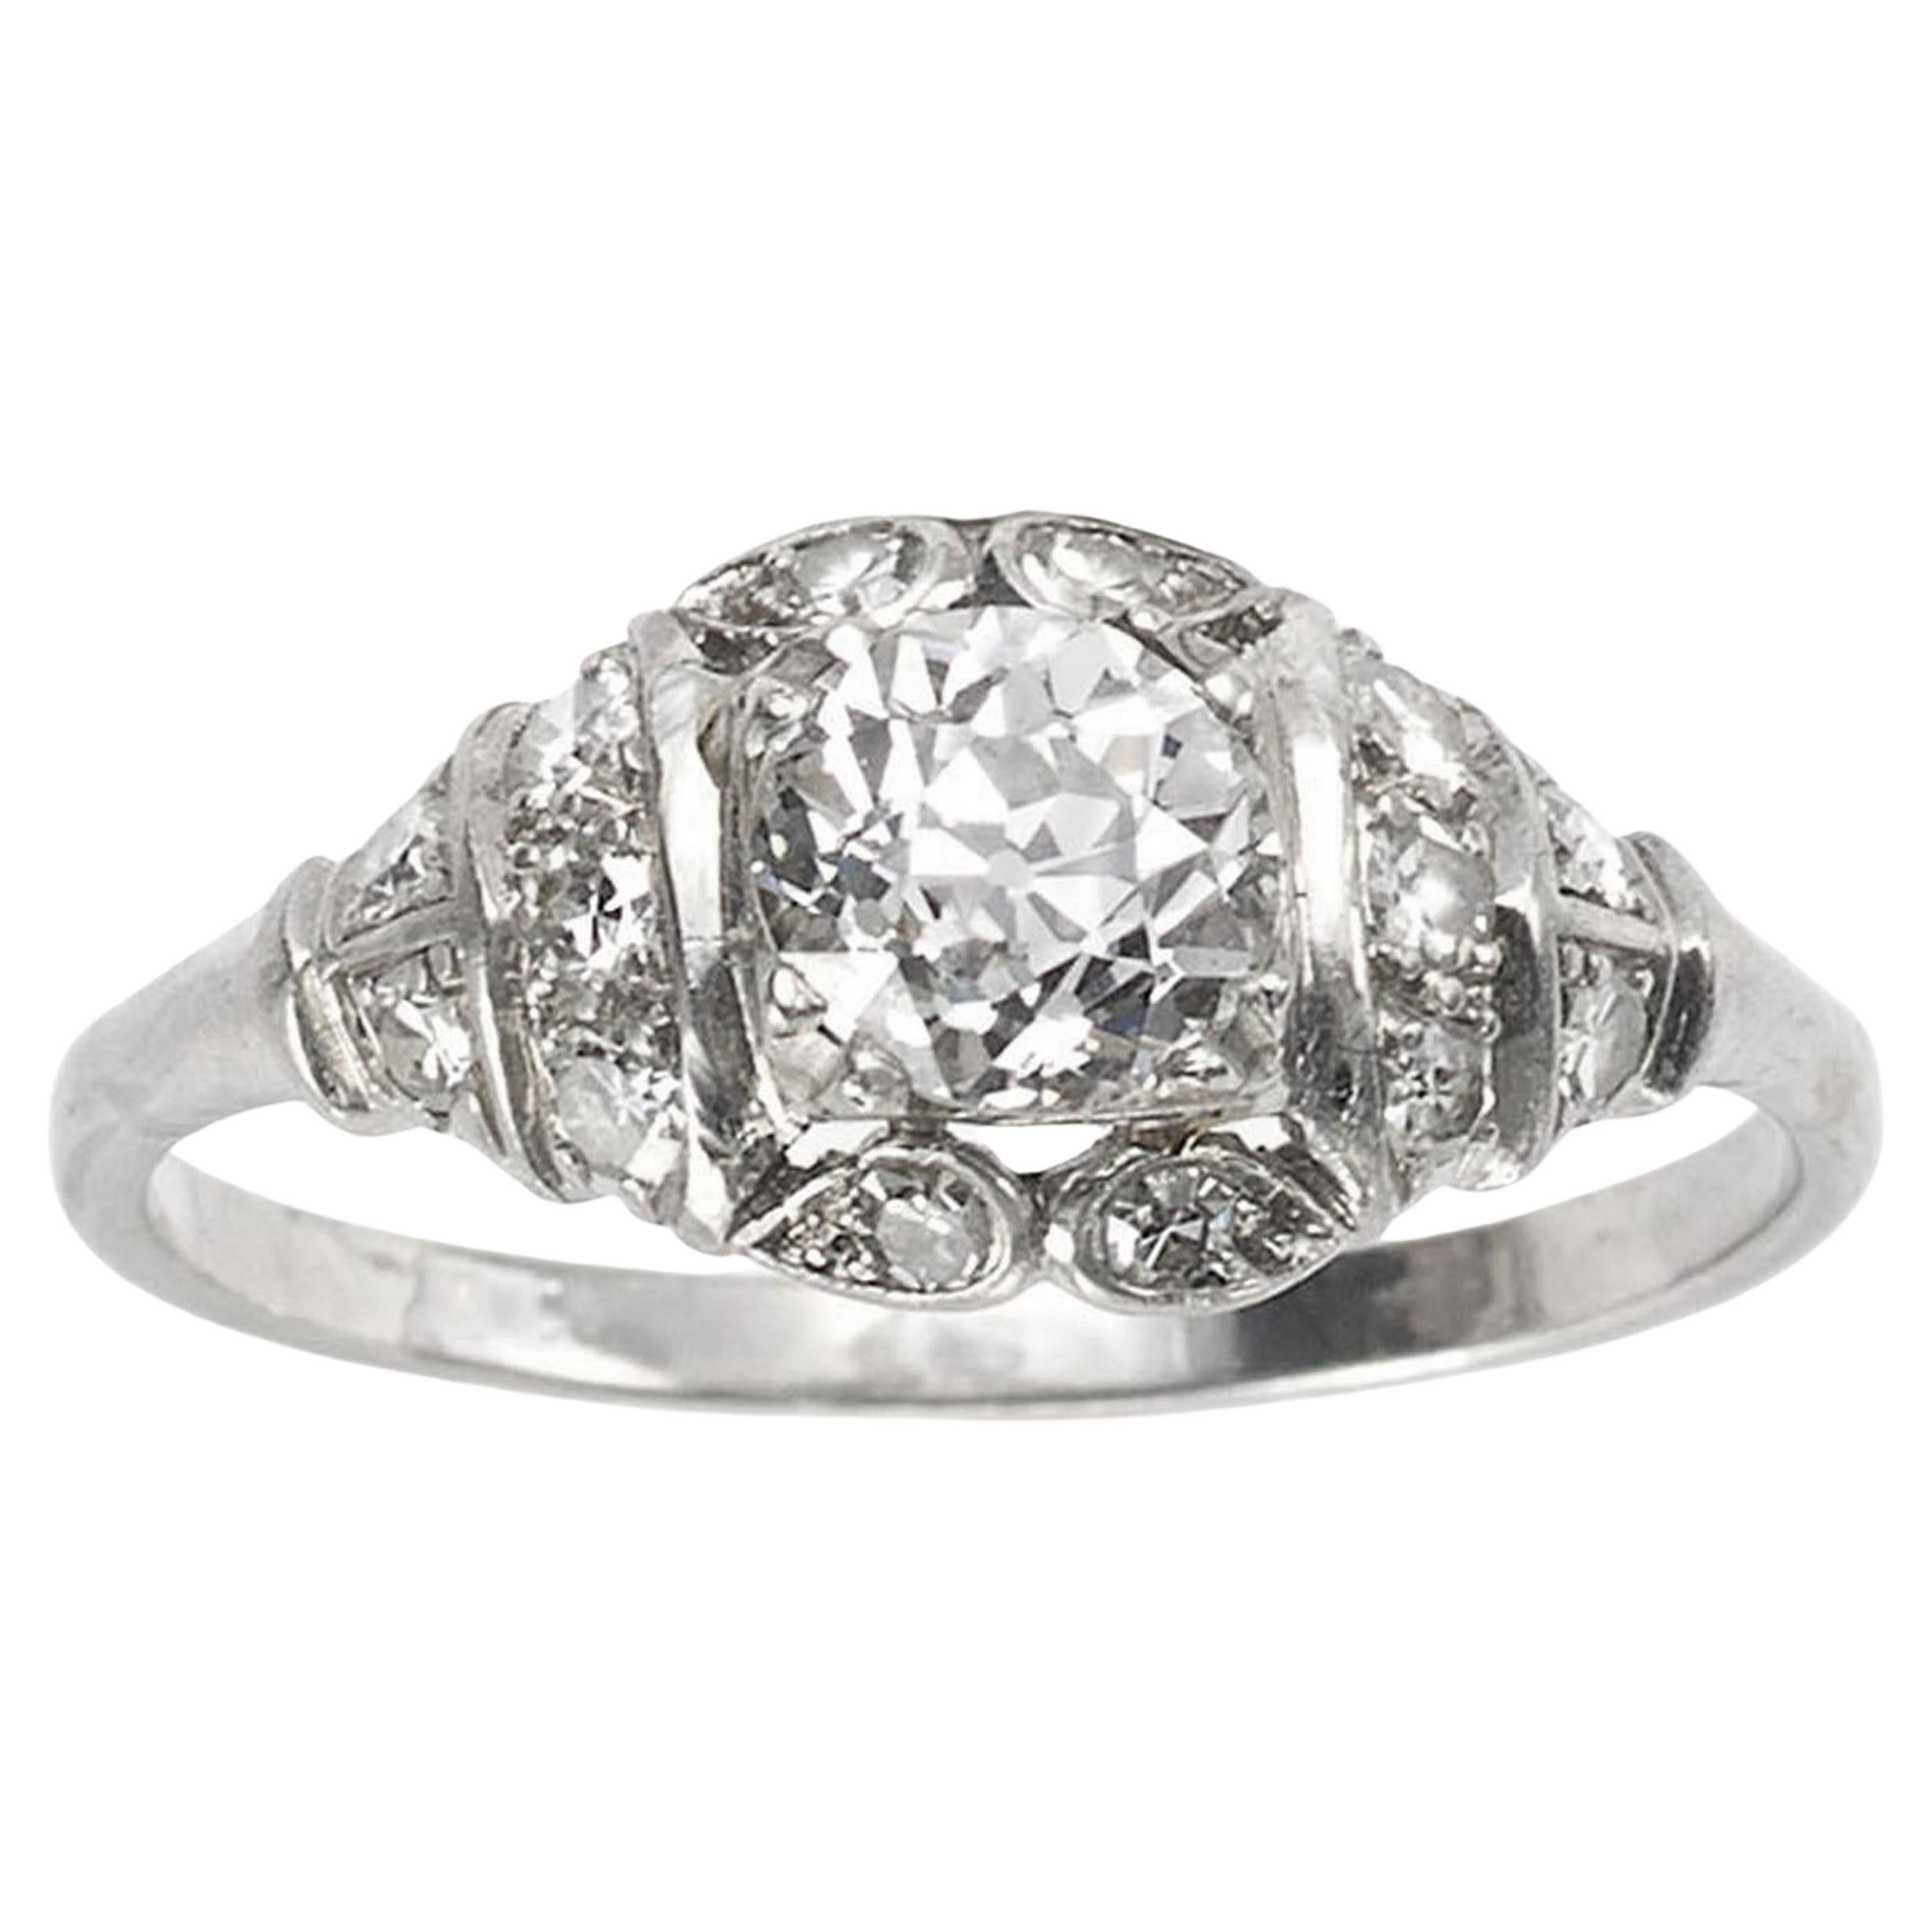 Late Art Deco Diamond and Platinum Ring, 0.85 Carats H SI1, circa 1940 For Sale